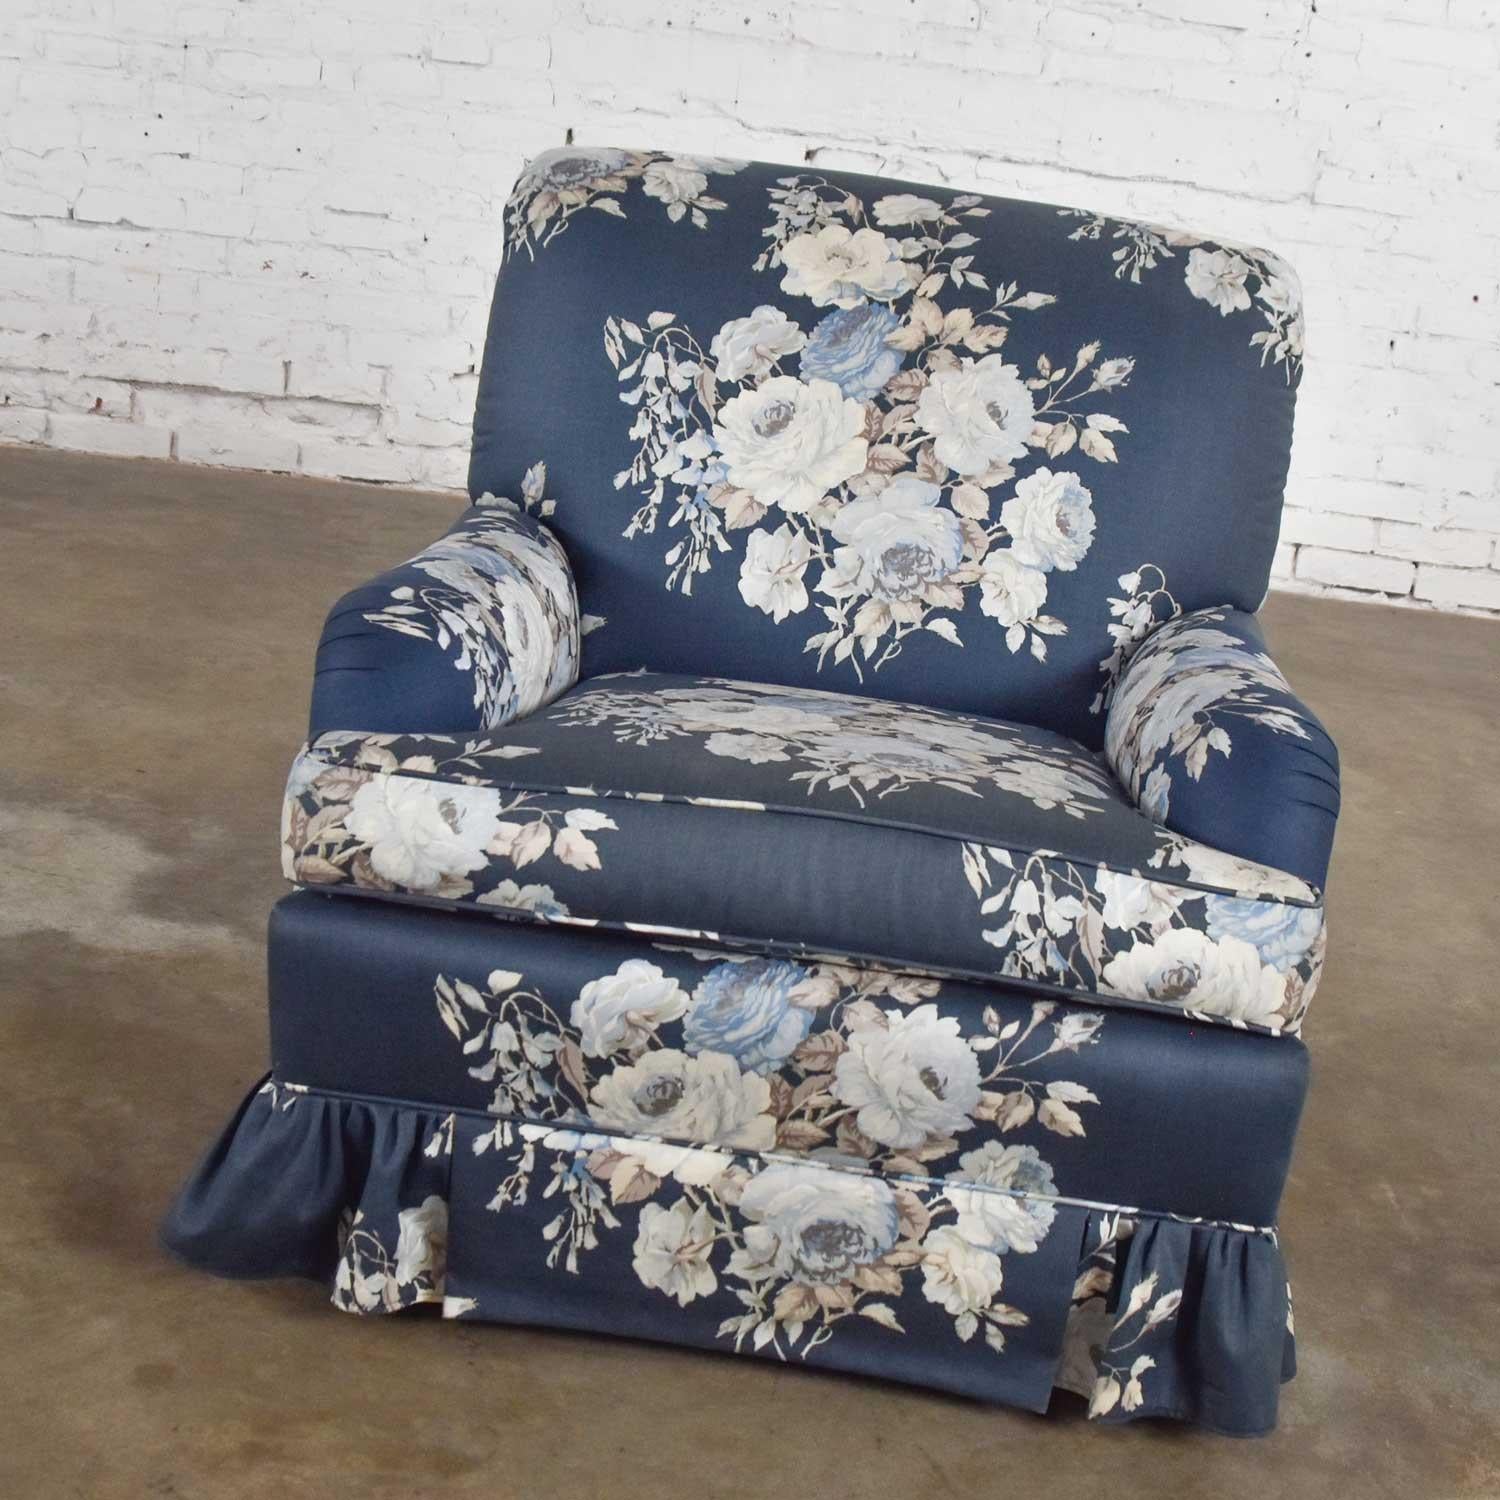 Lovely Hollywood Regency gray Chintz cabbage rose floral club chair with swivel rocker. Beautiful age-appropriate vintage condition with no outstanding flaws that we have detected. Please see photos, circa 1940s-1950s.

A chair that would make The